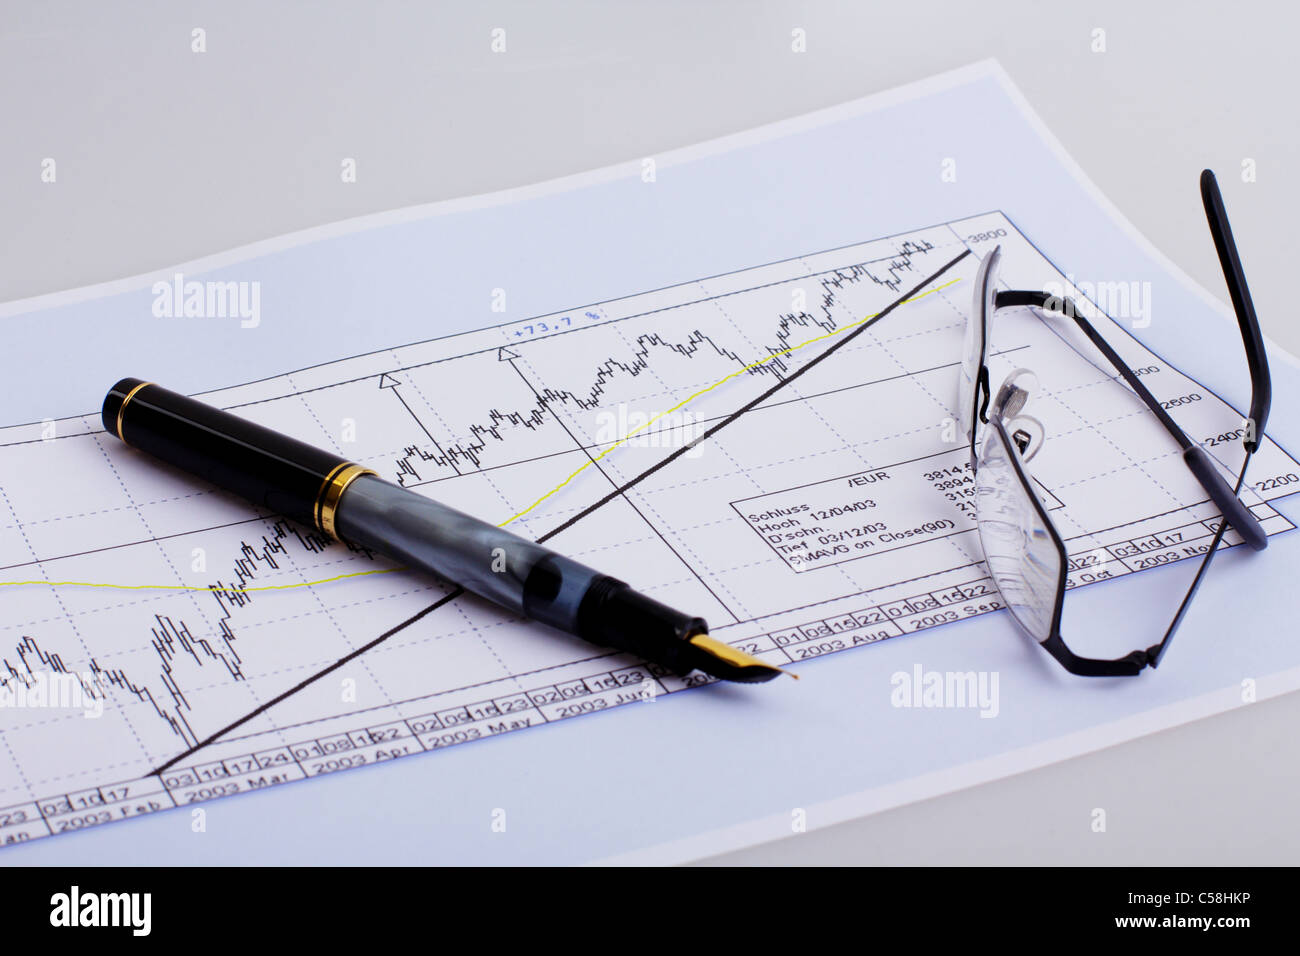 stockchart glasses and fillers on Stock Photo